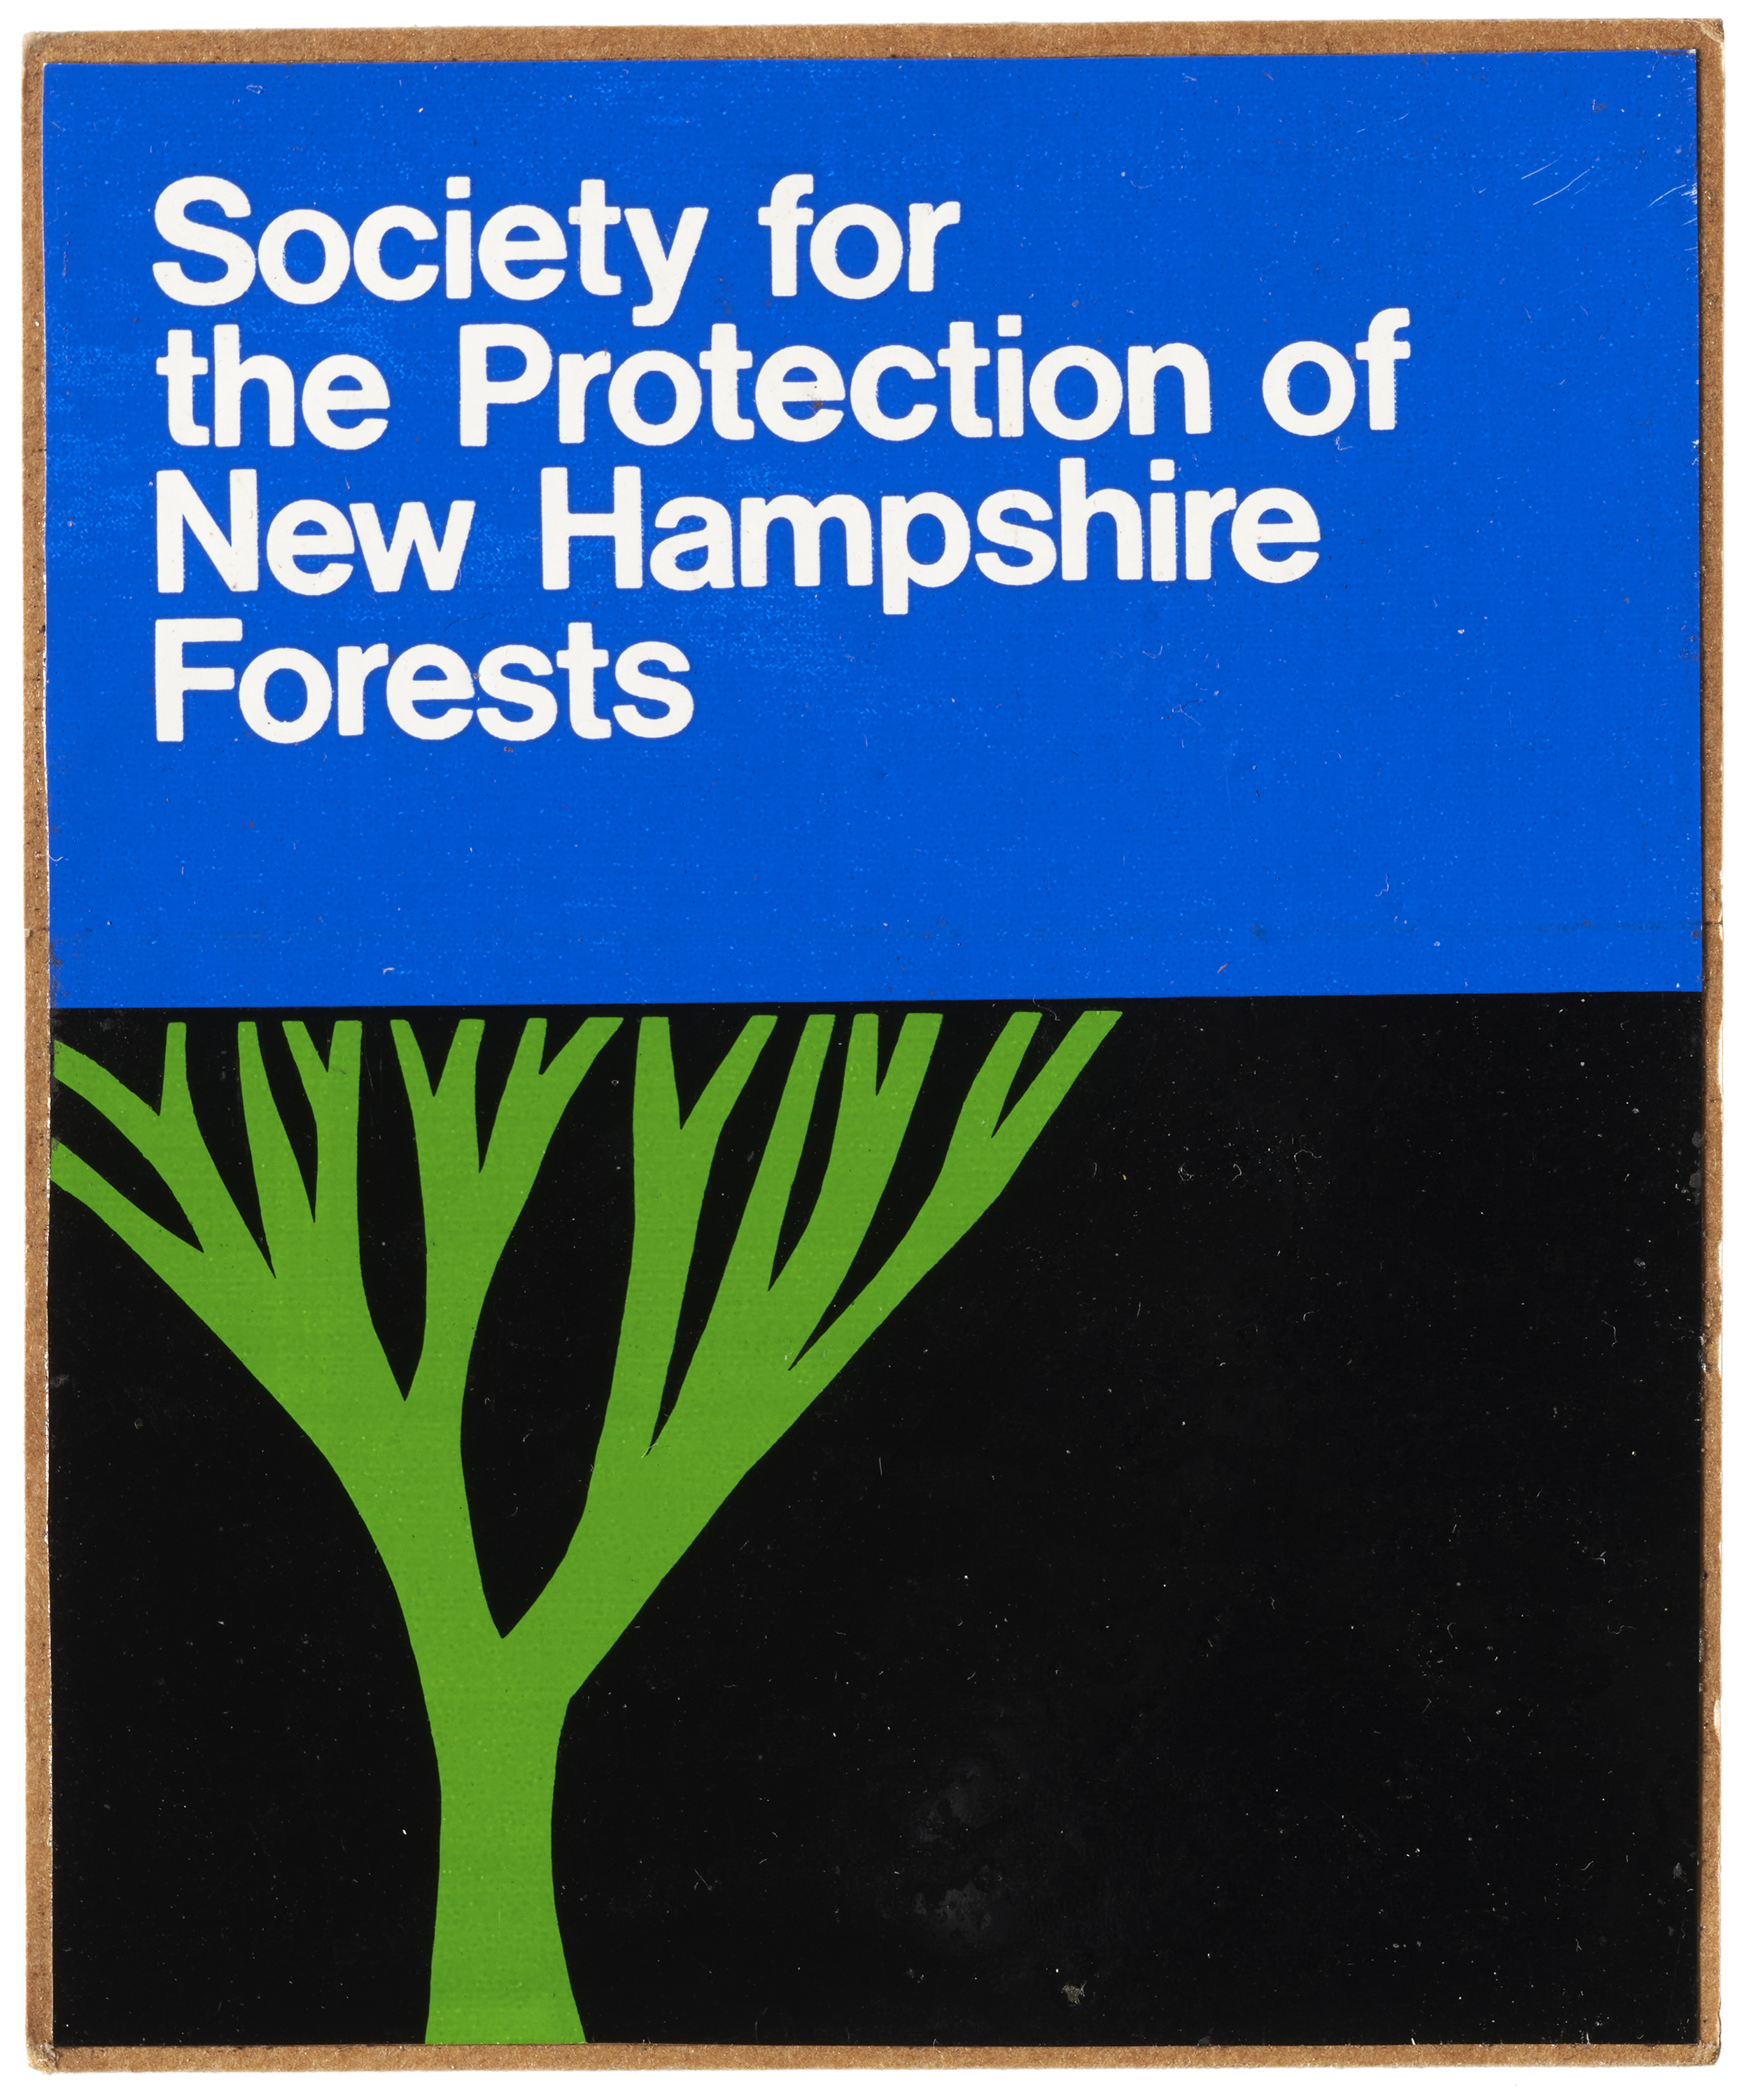 Sticker for the Society for the Protection of New Hampshire Forests, United States, ca. 1970